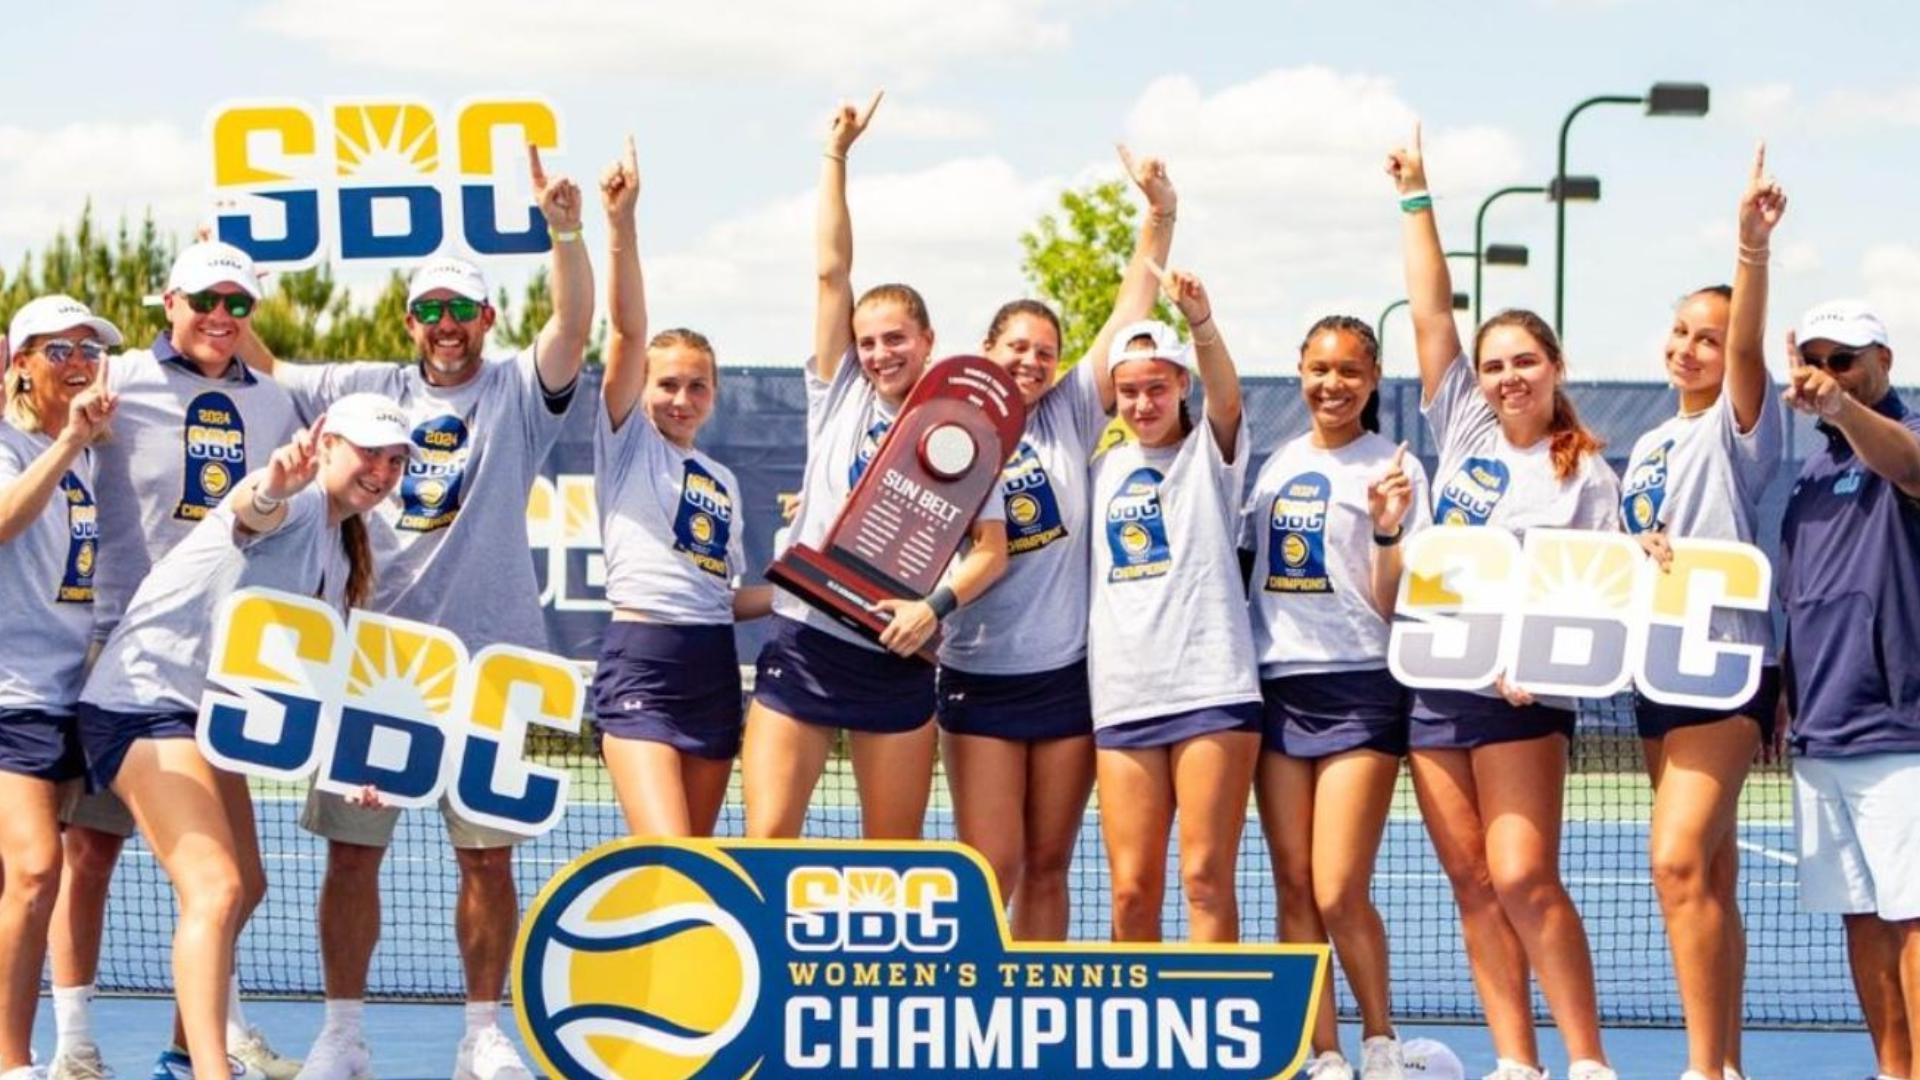 ODU enters the tourney winners of 13 matches in a row after capturing their second straight Sun Belt Tournament crown & fourth straight league crown.